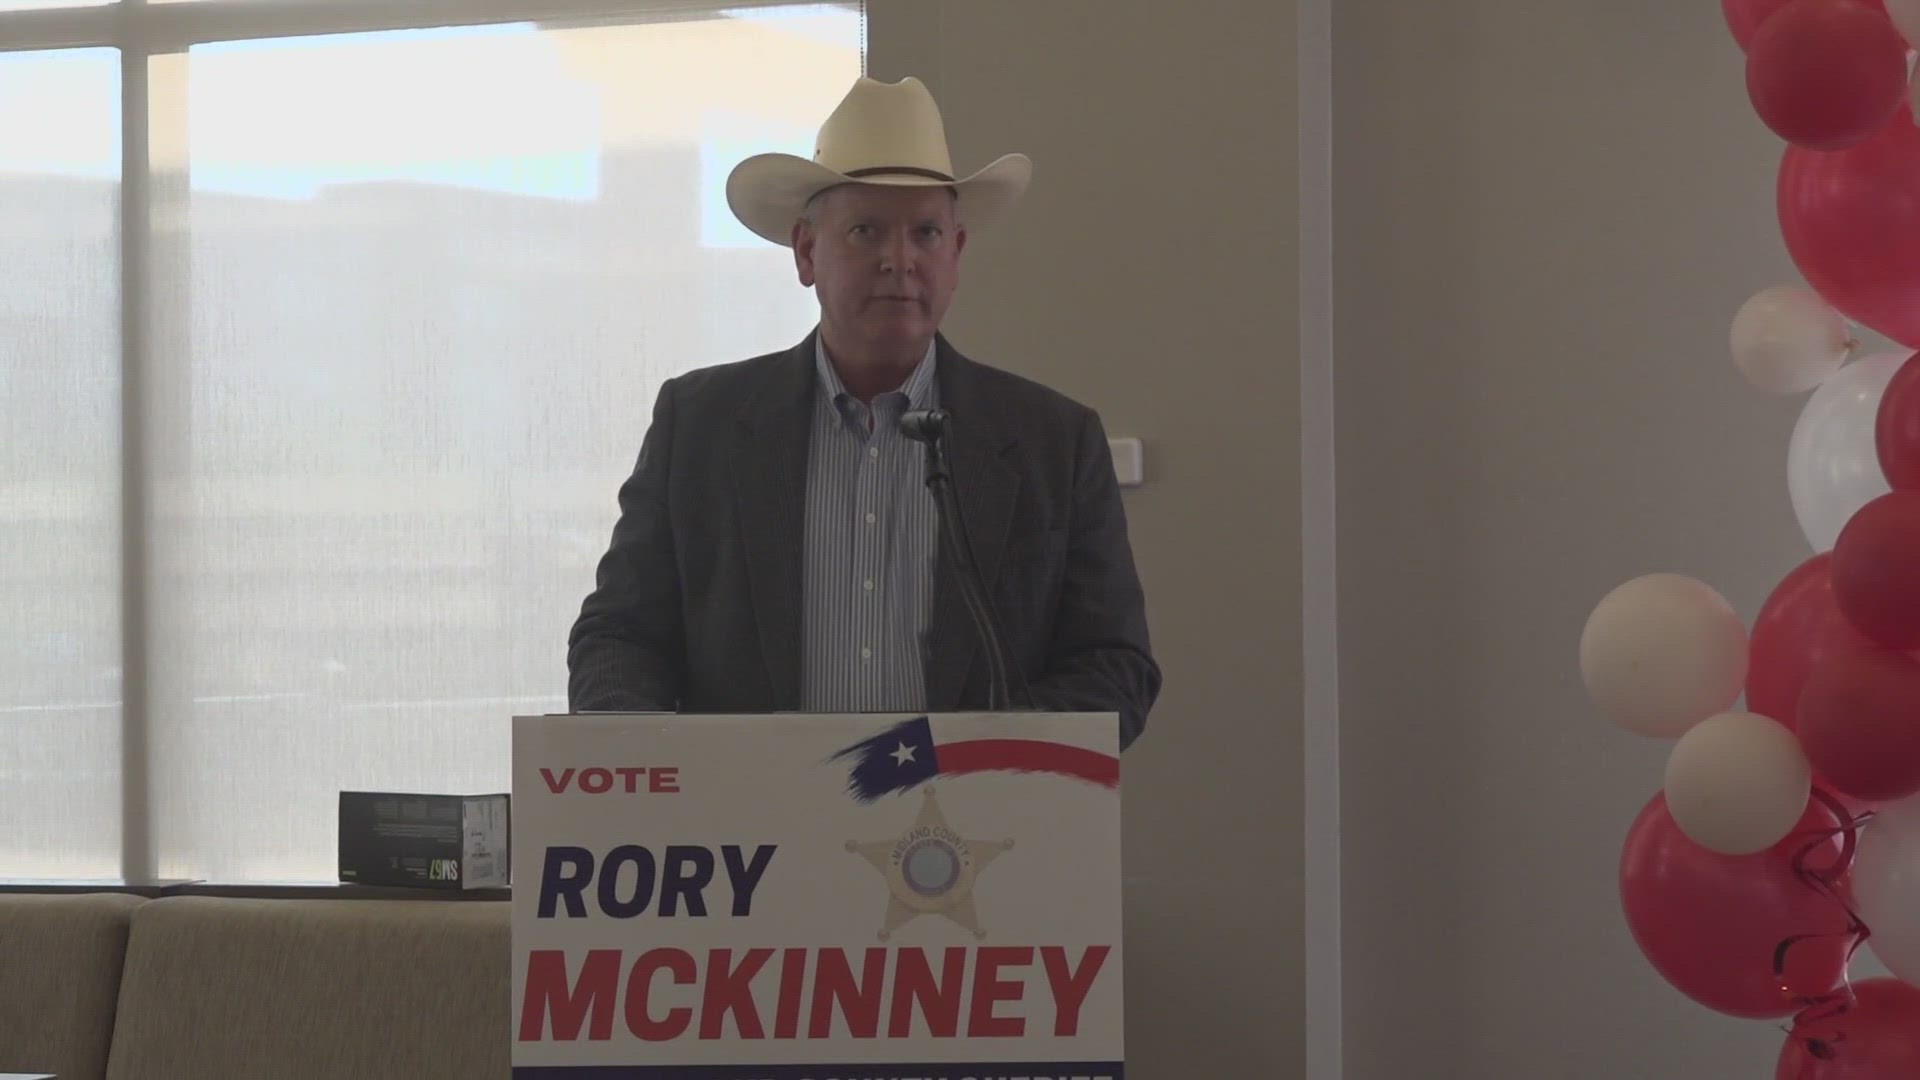 Rory McKinney, who is running for Midland County sheriff, said on Saturday that his Facebook page has been hacked.